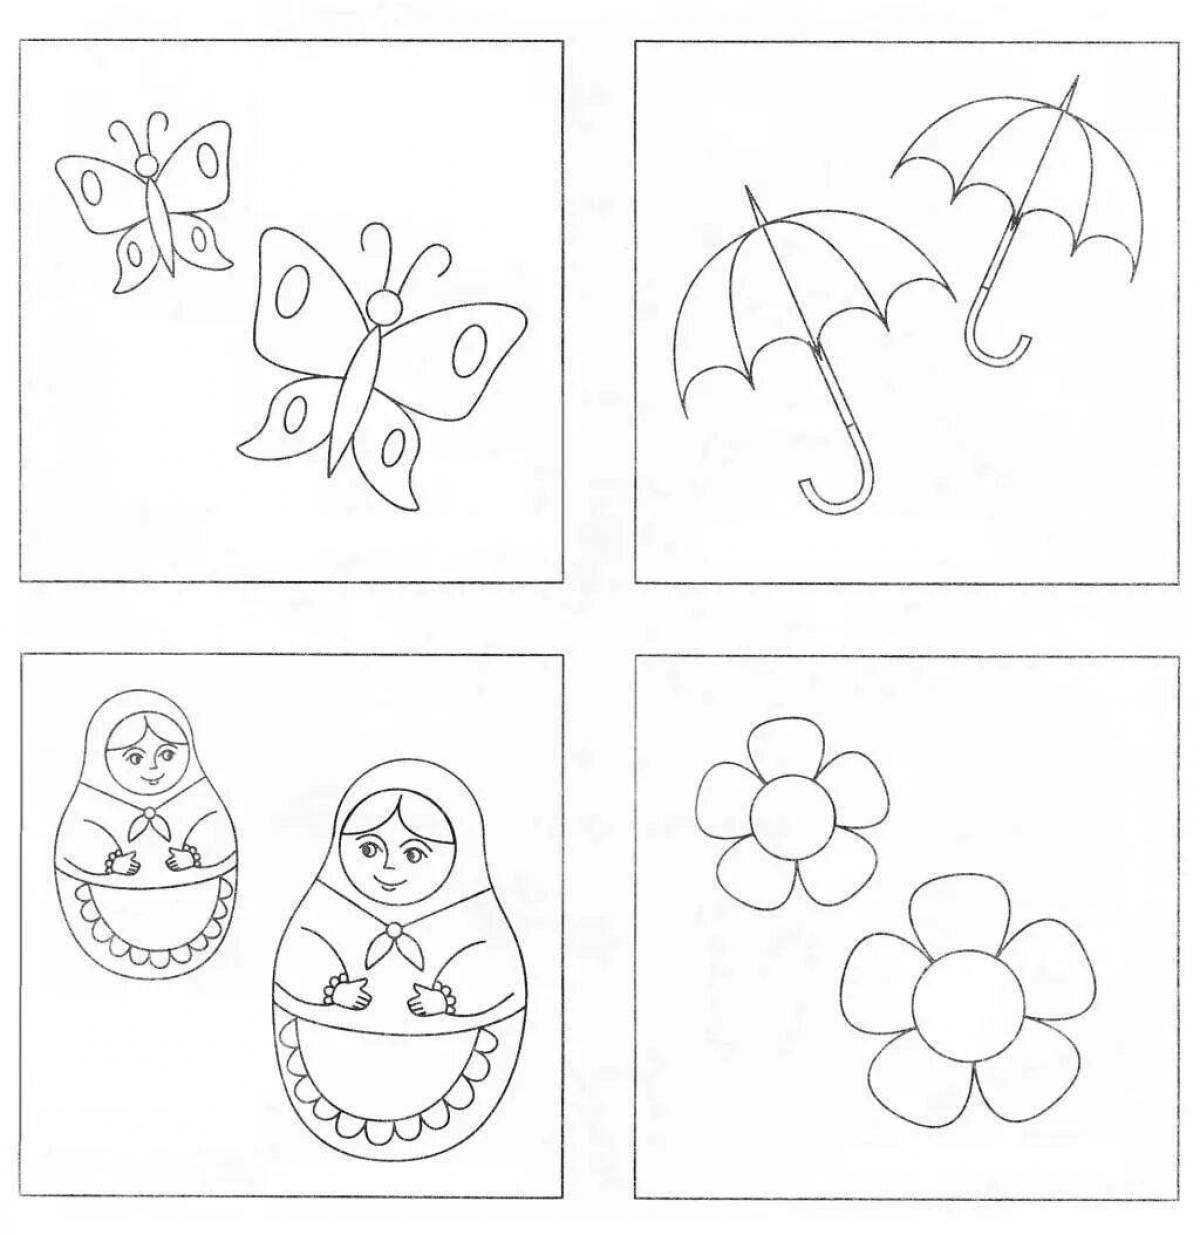 Intriguing logic coloring book for kids